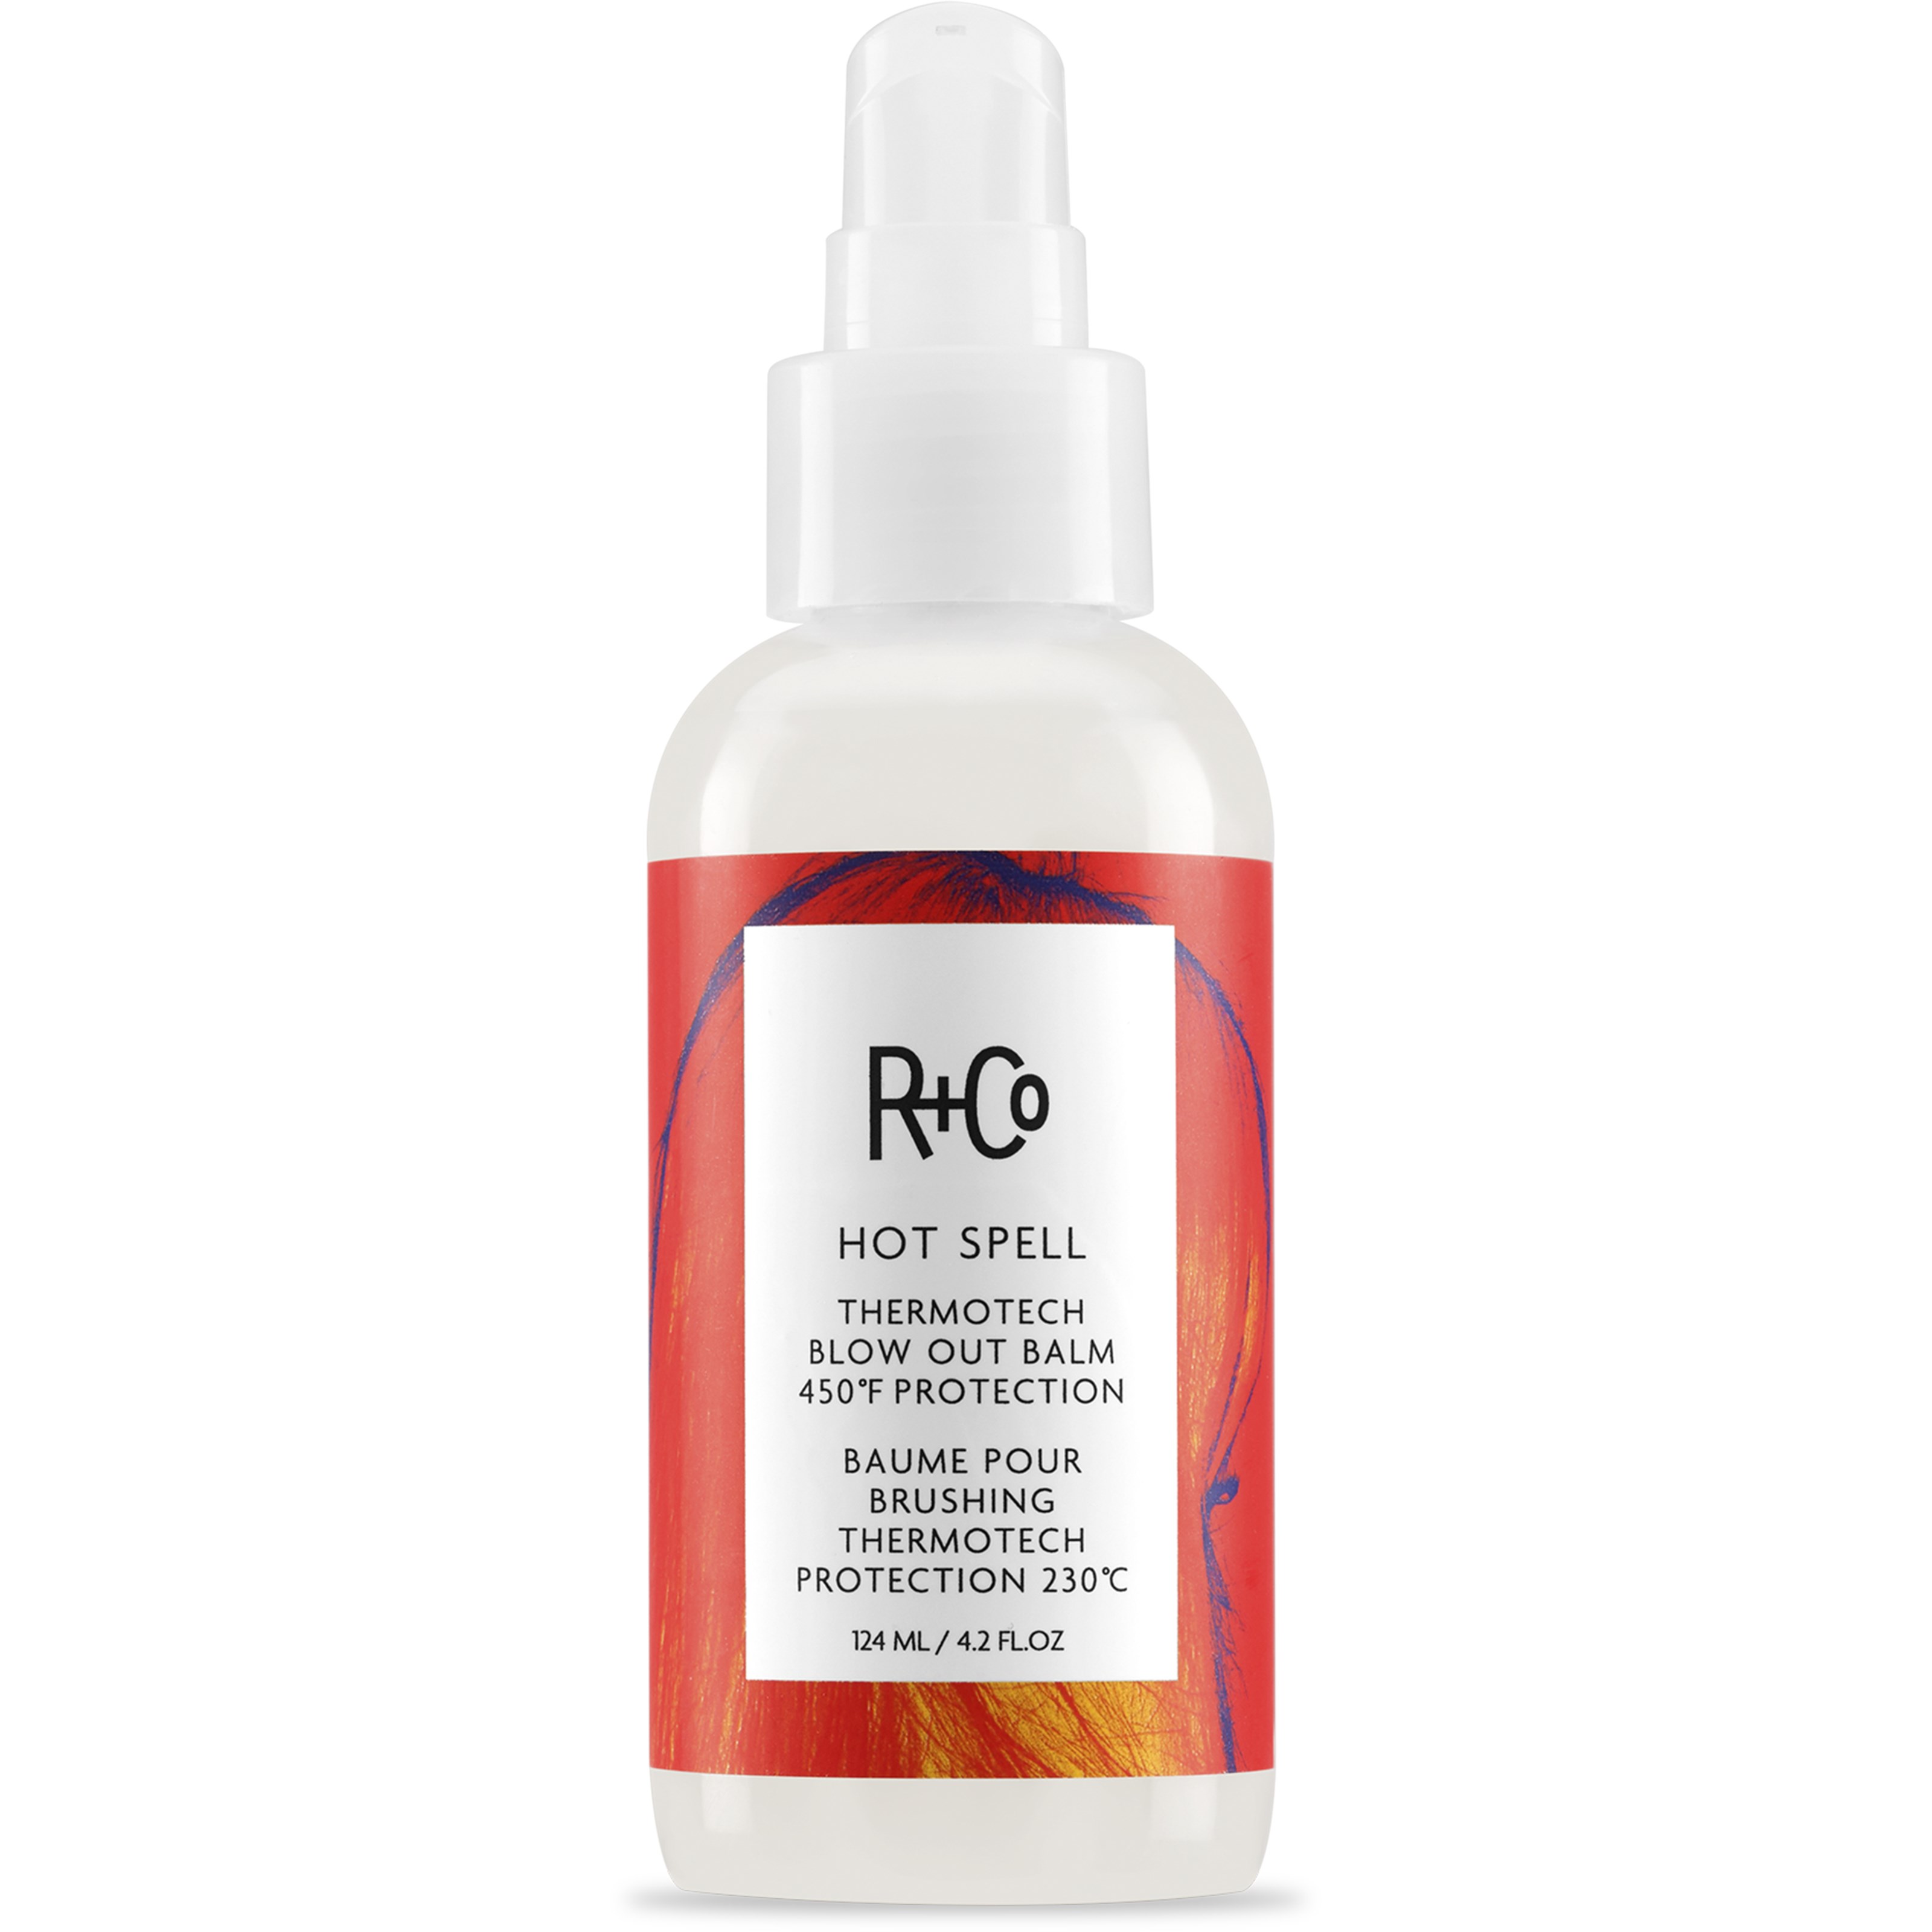 Läs mer om R+Co Hot Spell Thermotech Blow Out Balm 124 ml